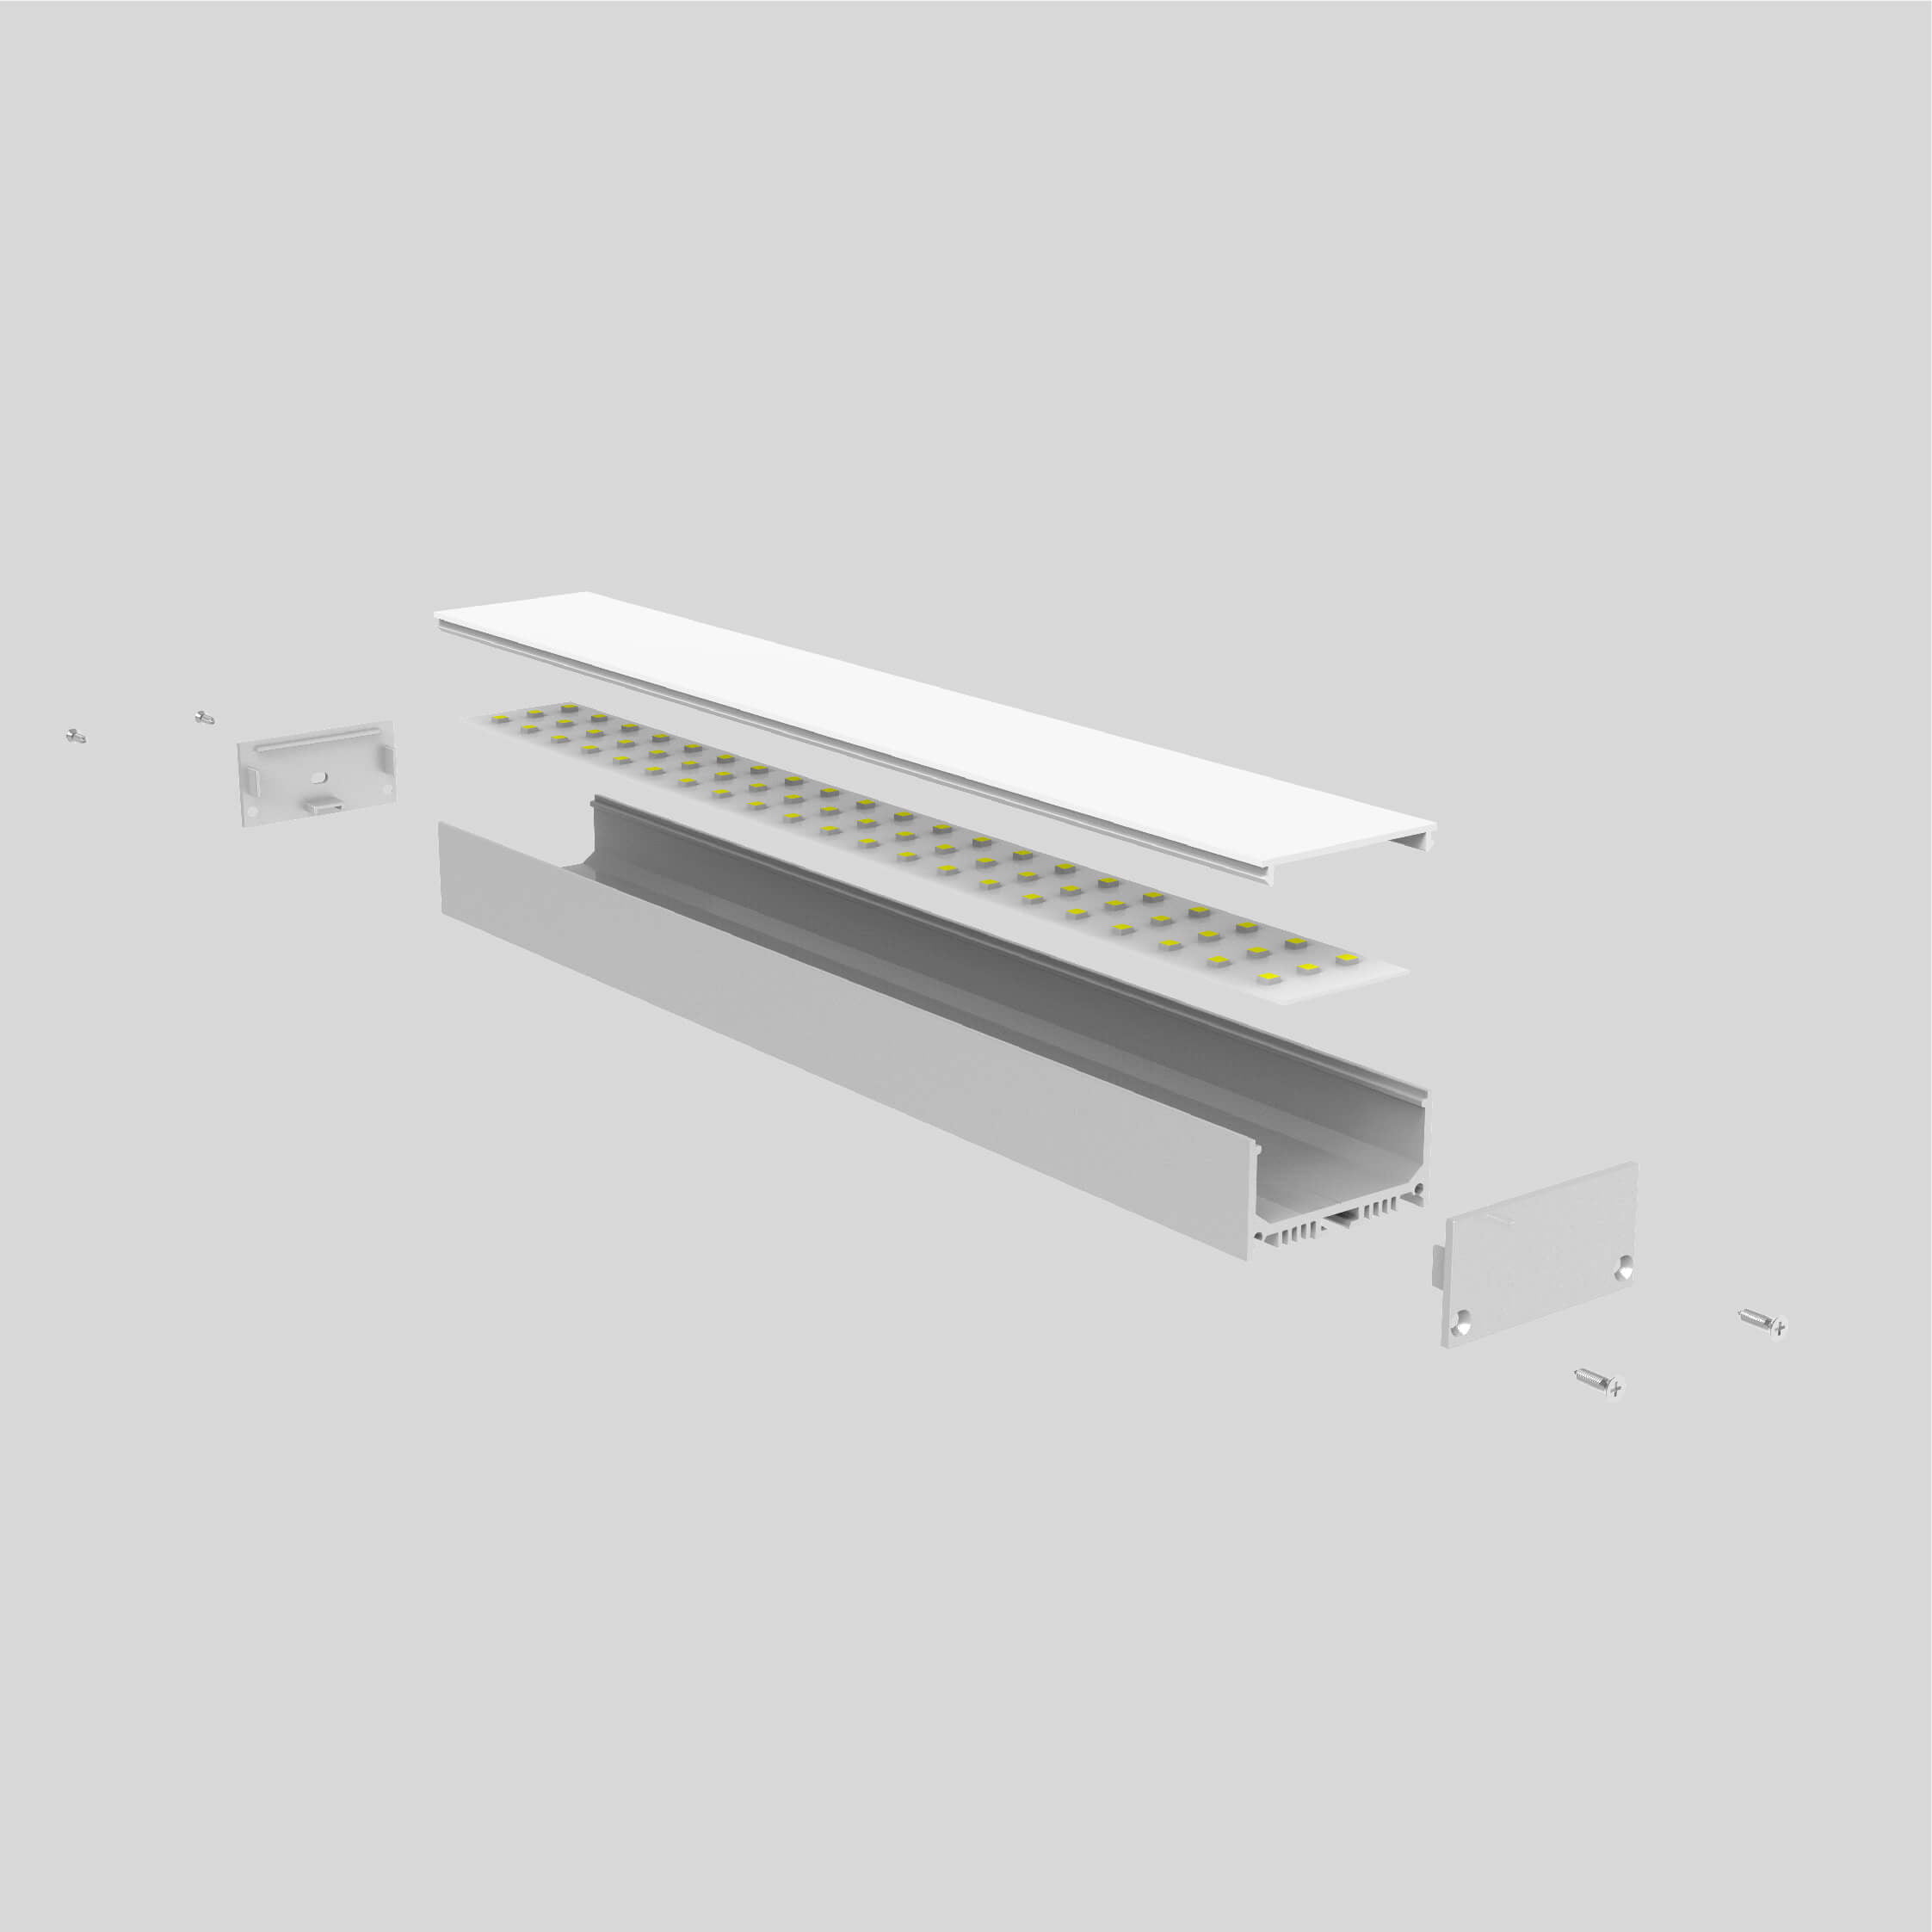 Wall mounted linear light structure